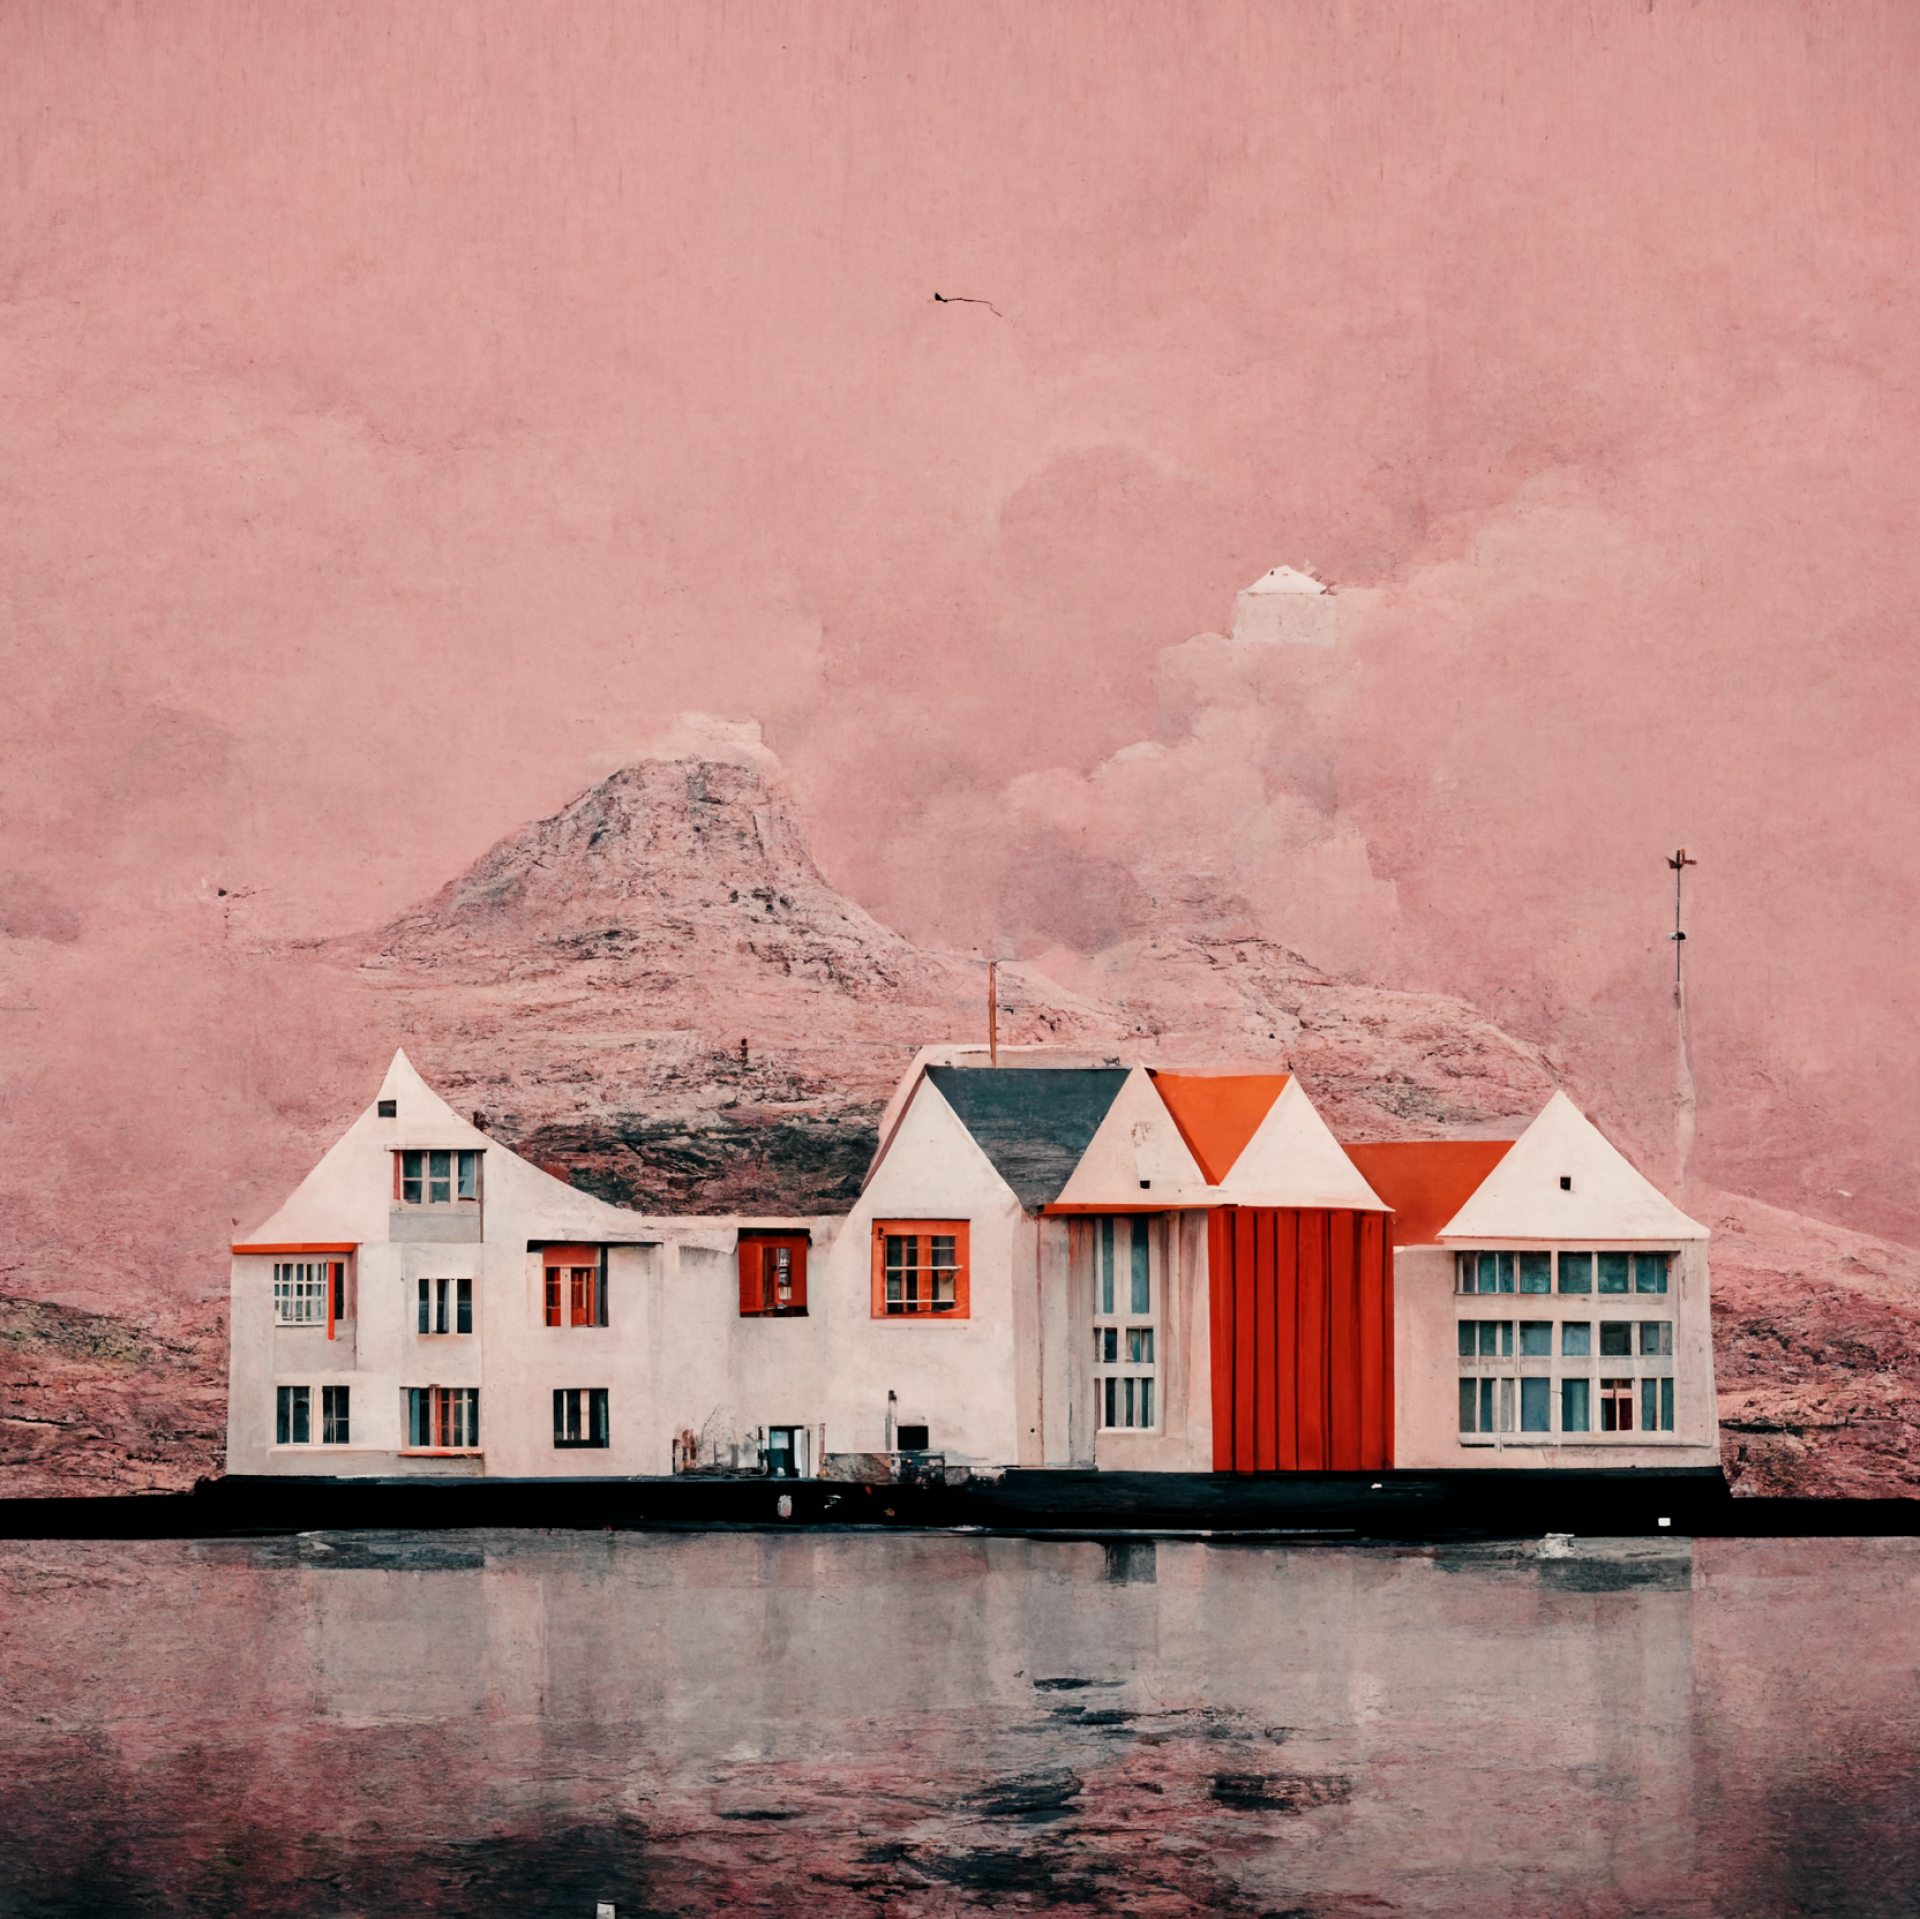 AI-generated image from Midjourney, the Faroe Islands inspired by Wes Anderson.